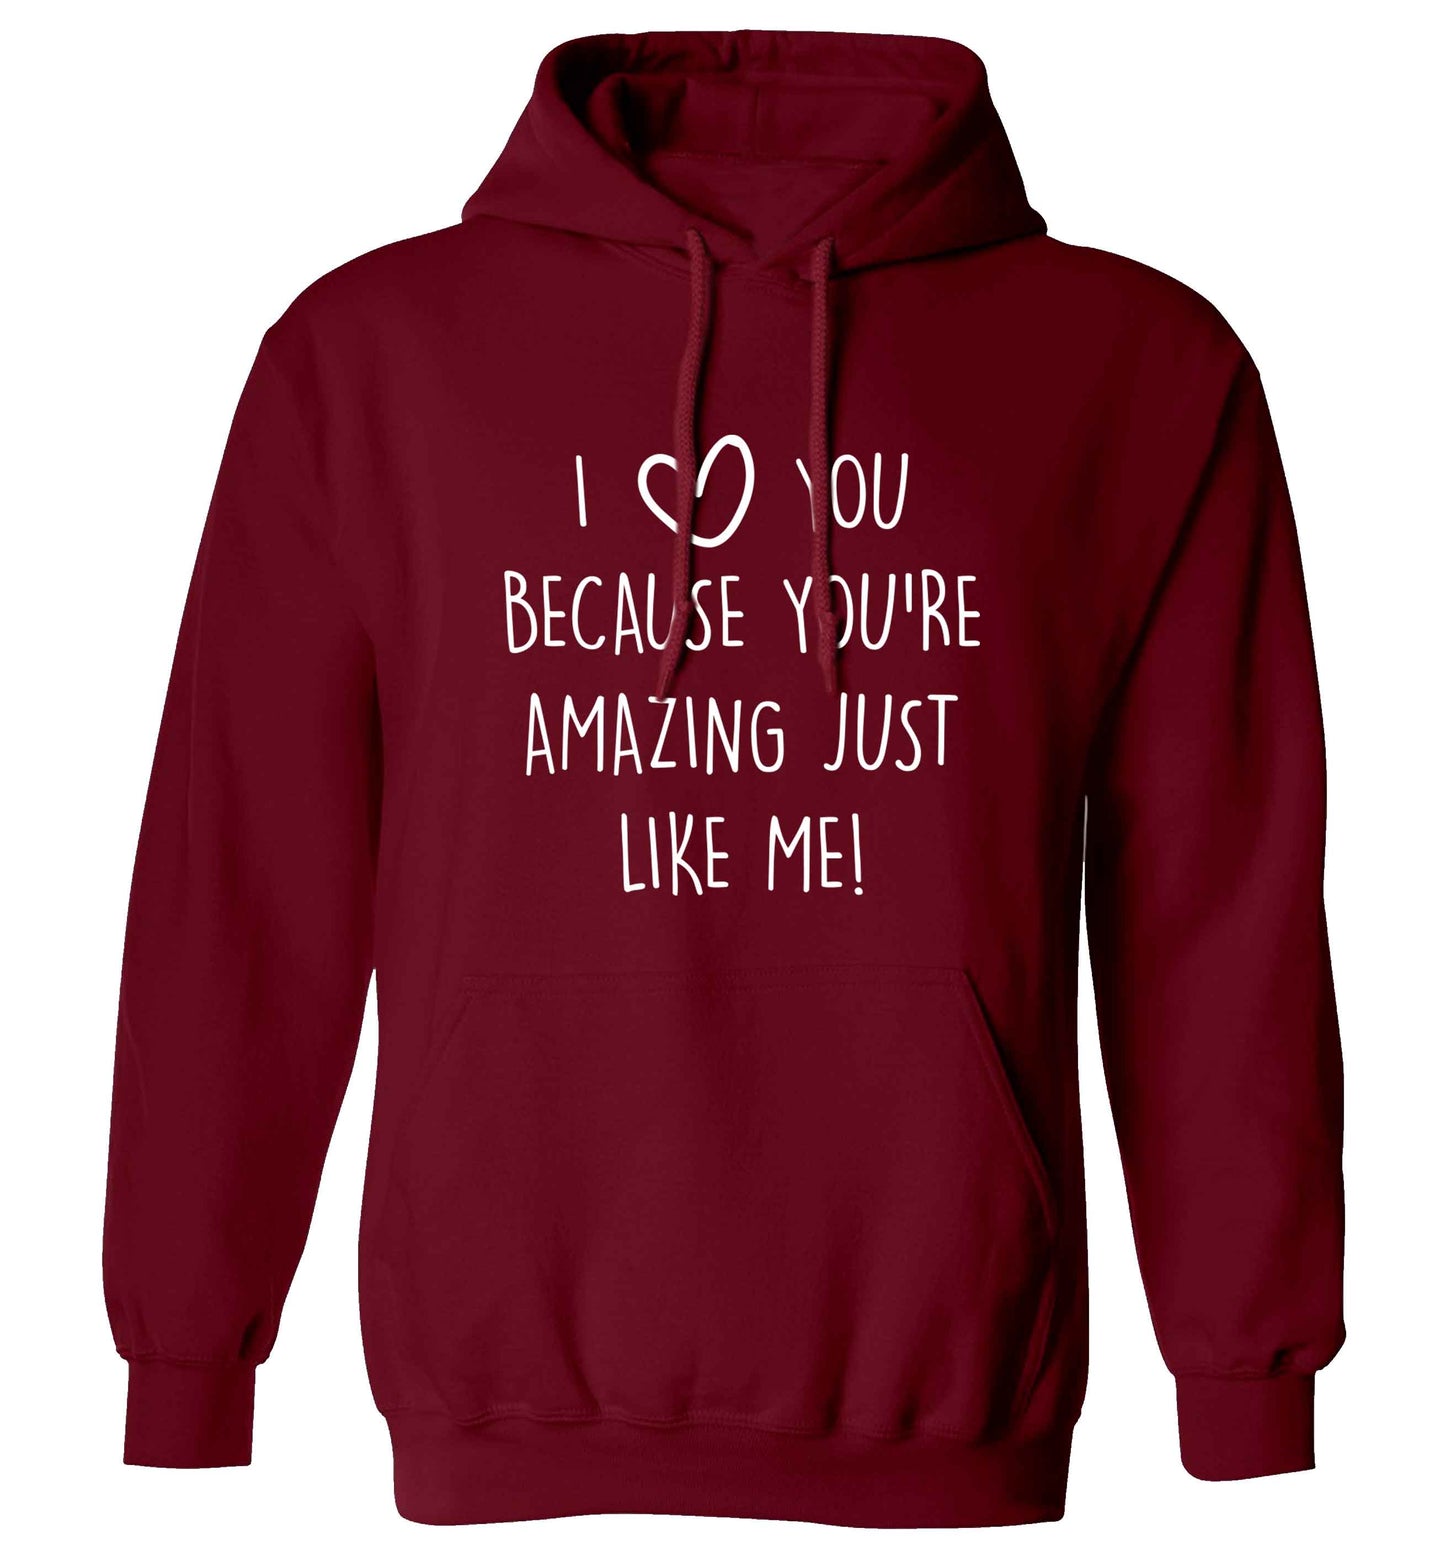 I love you because you're amazing just like me adults unisex maroon hoodie 2XL